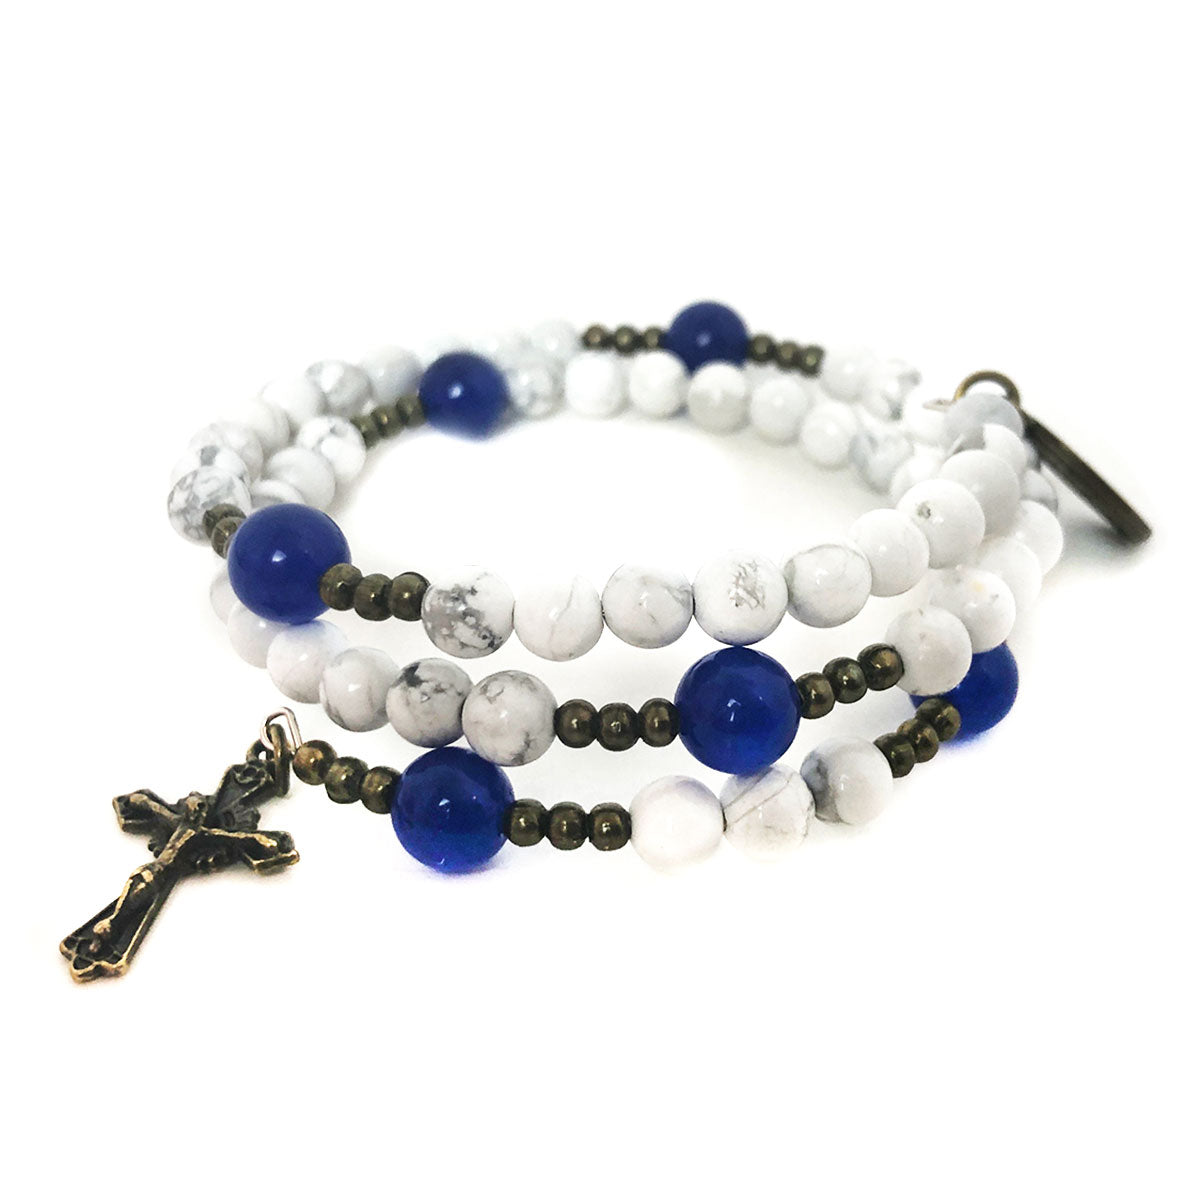 Mother Teresa White Howlite Stone Rosary and Rosary Bracelet Set by Catholic Heirlooms